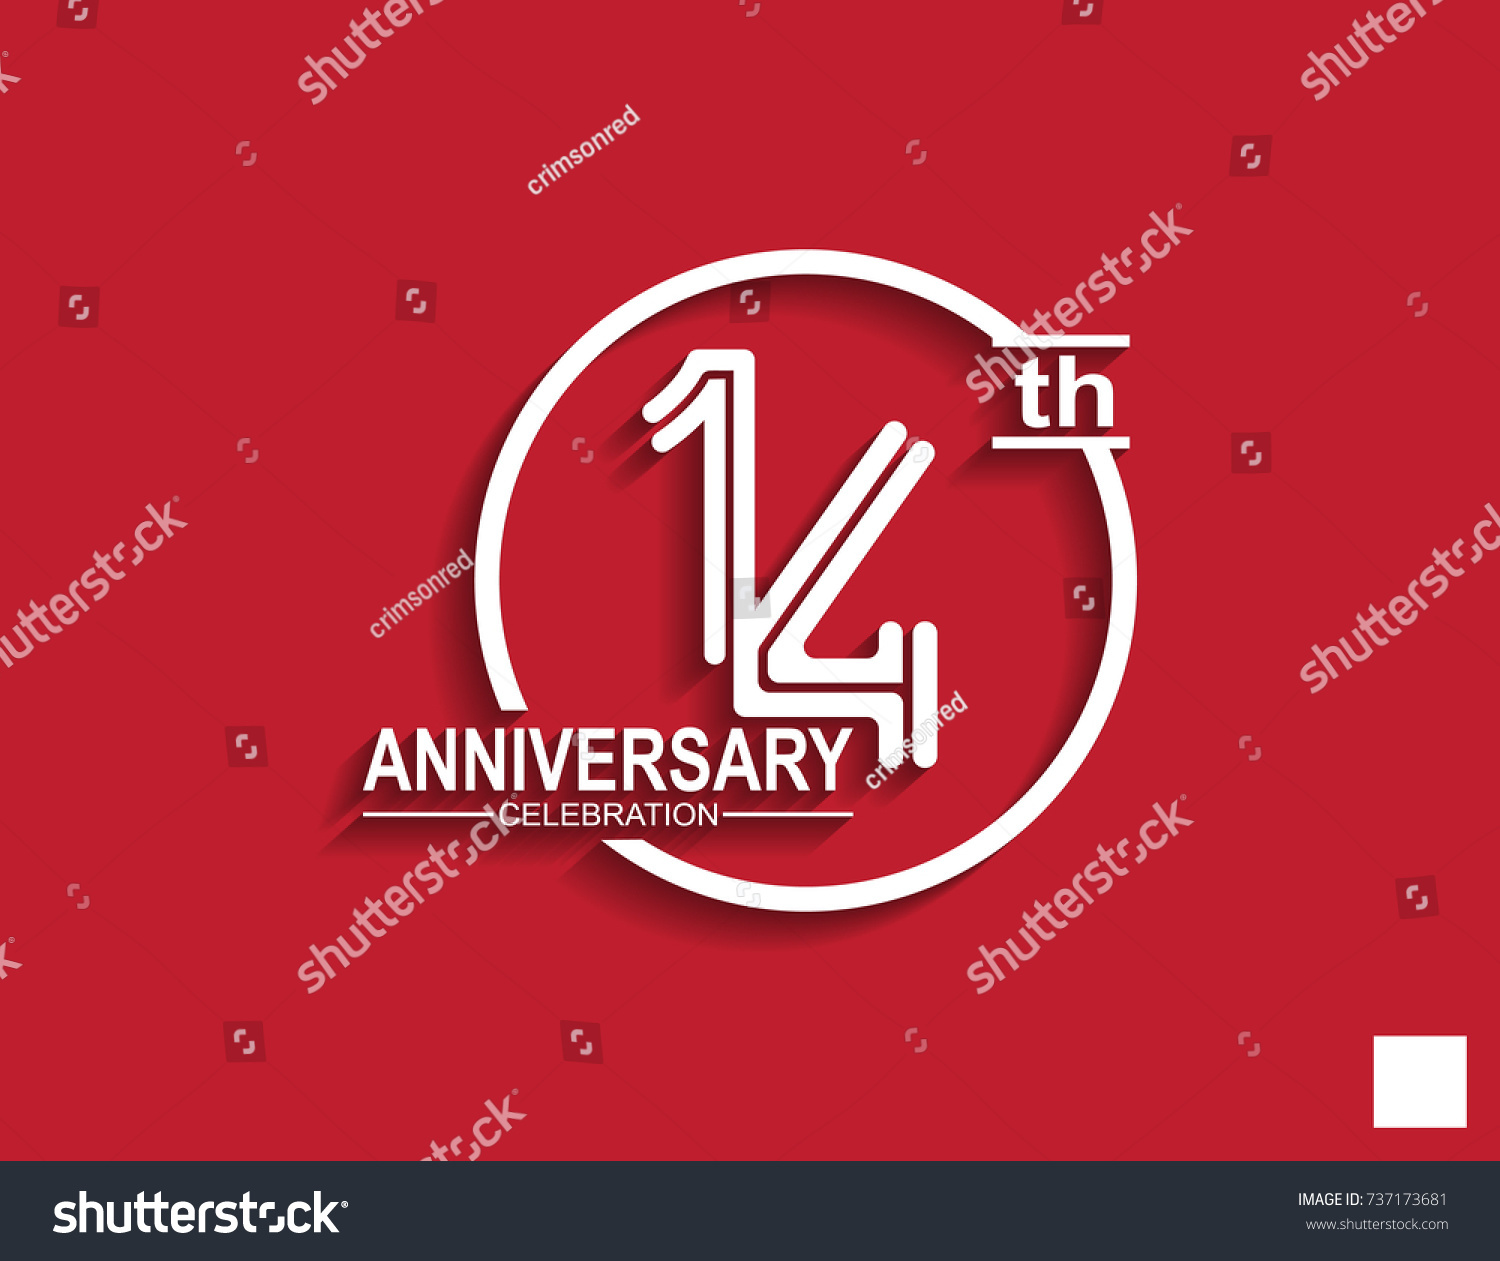 14th anniversary celebration logotype with linked number in circle isolated on red background #737173681